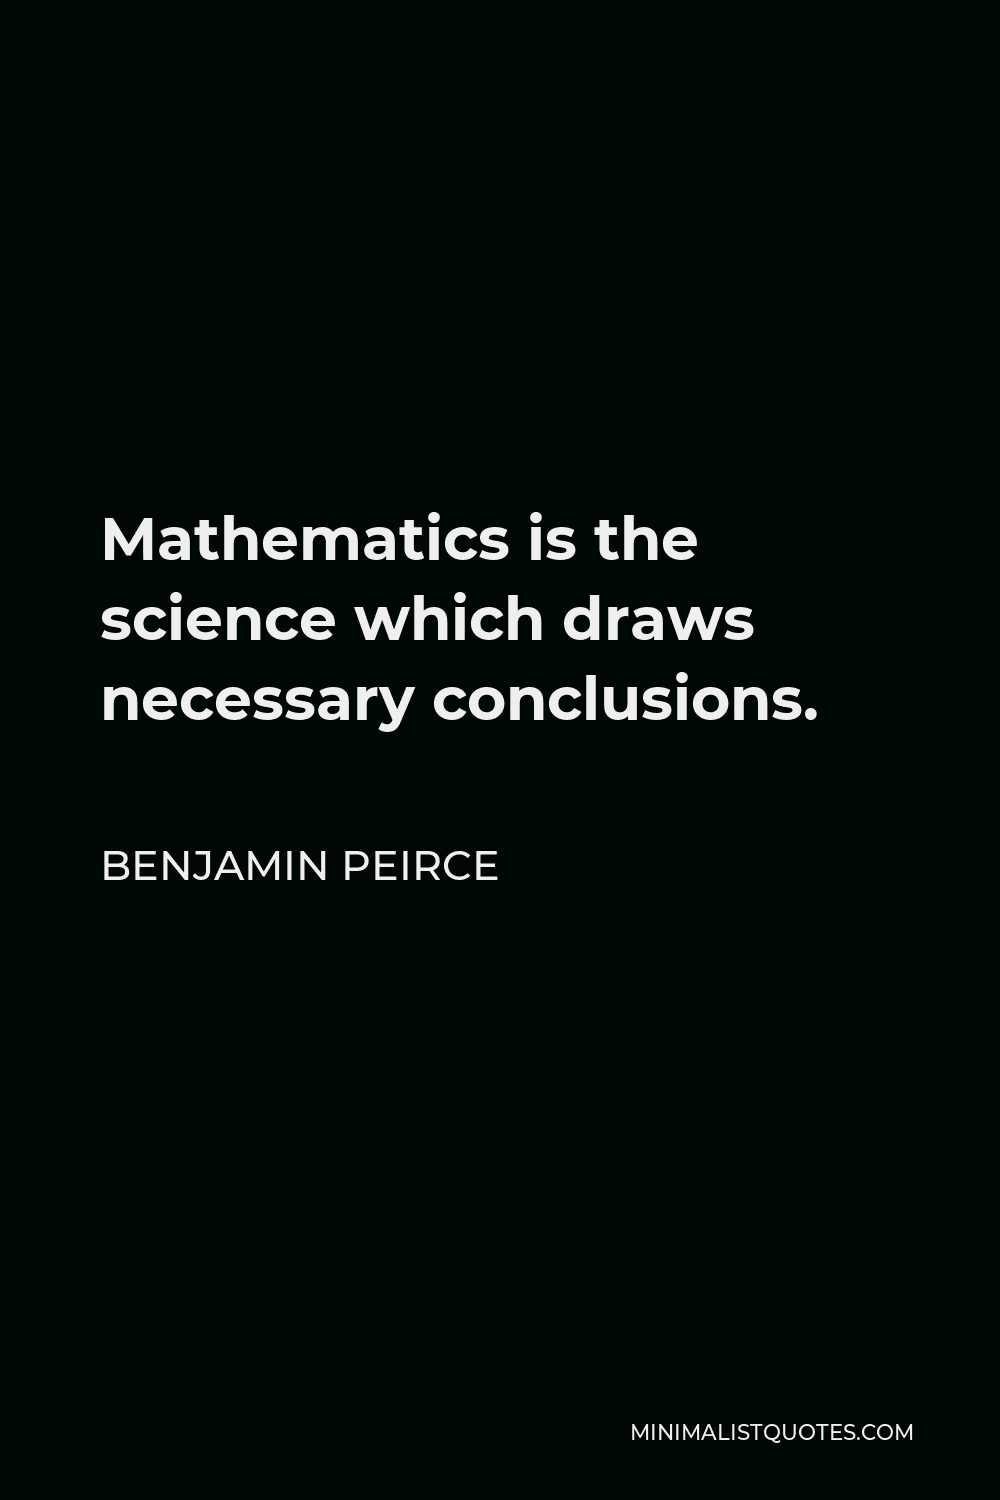 Benjamin Peirce Quote Mathematics is the science which draws necessary